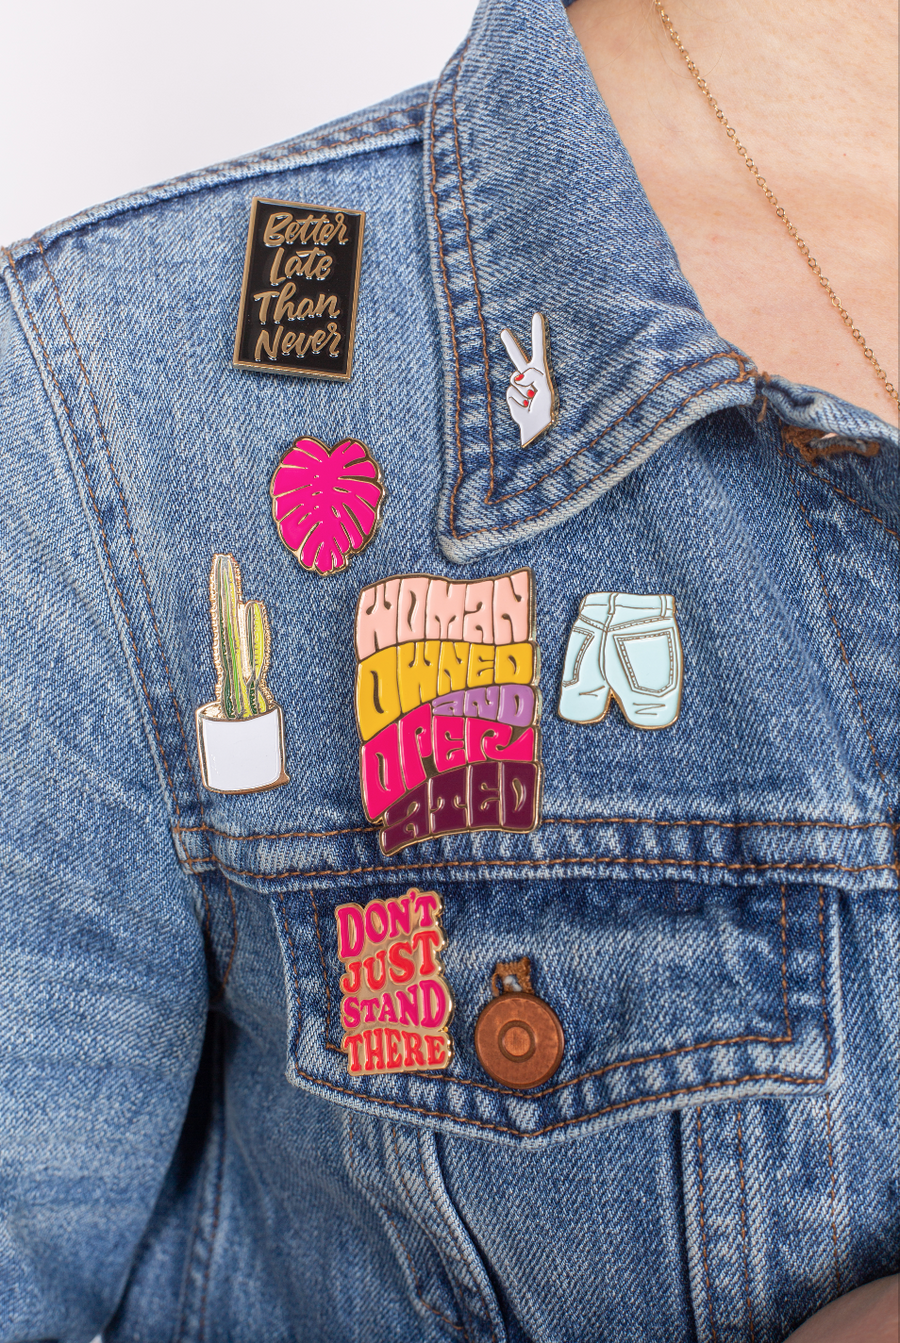 Personalize your jean jacket with buttons and enamel pins.